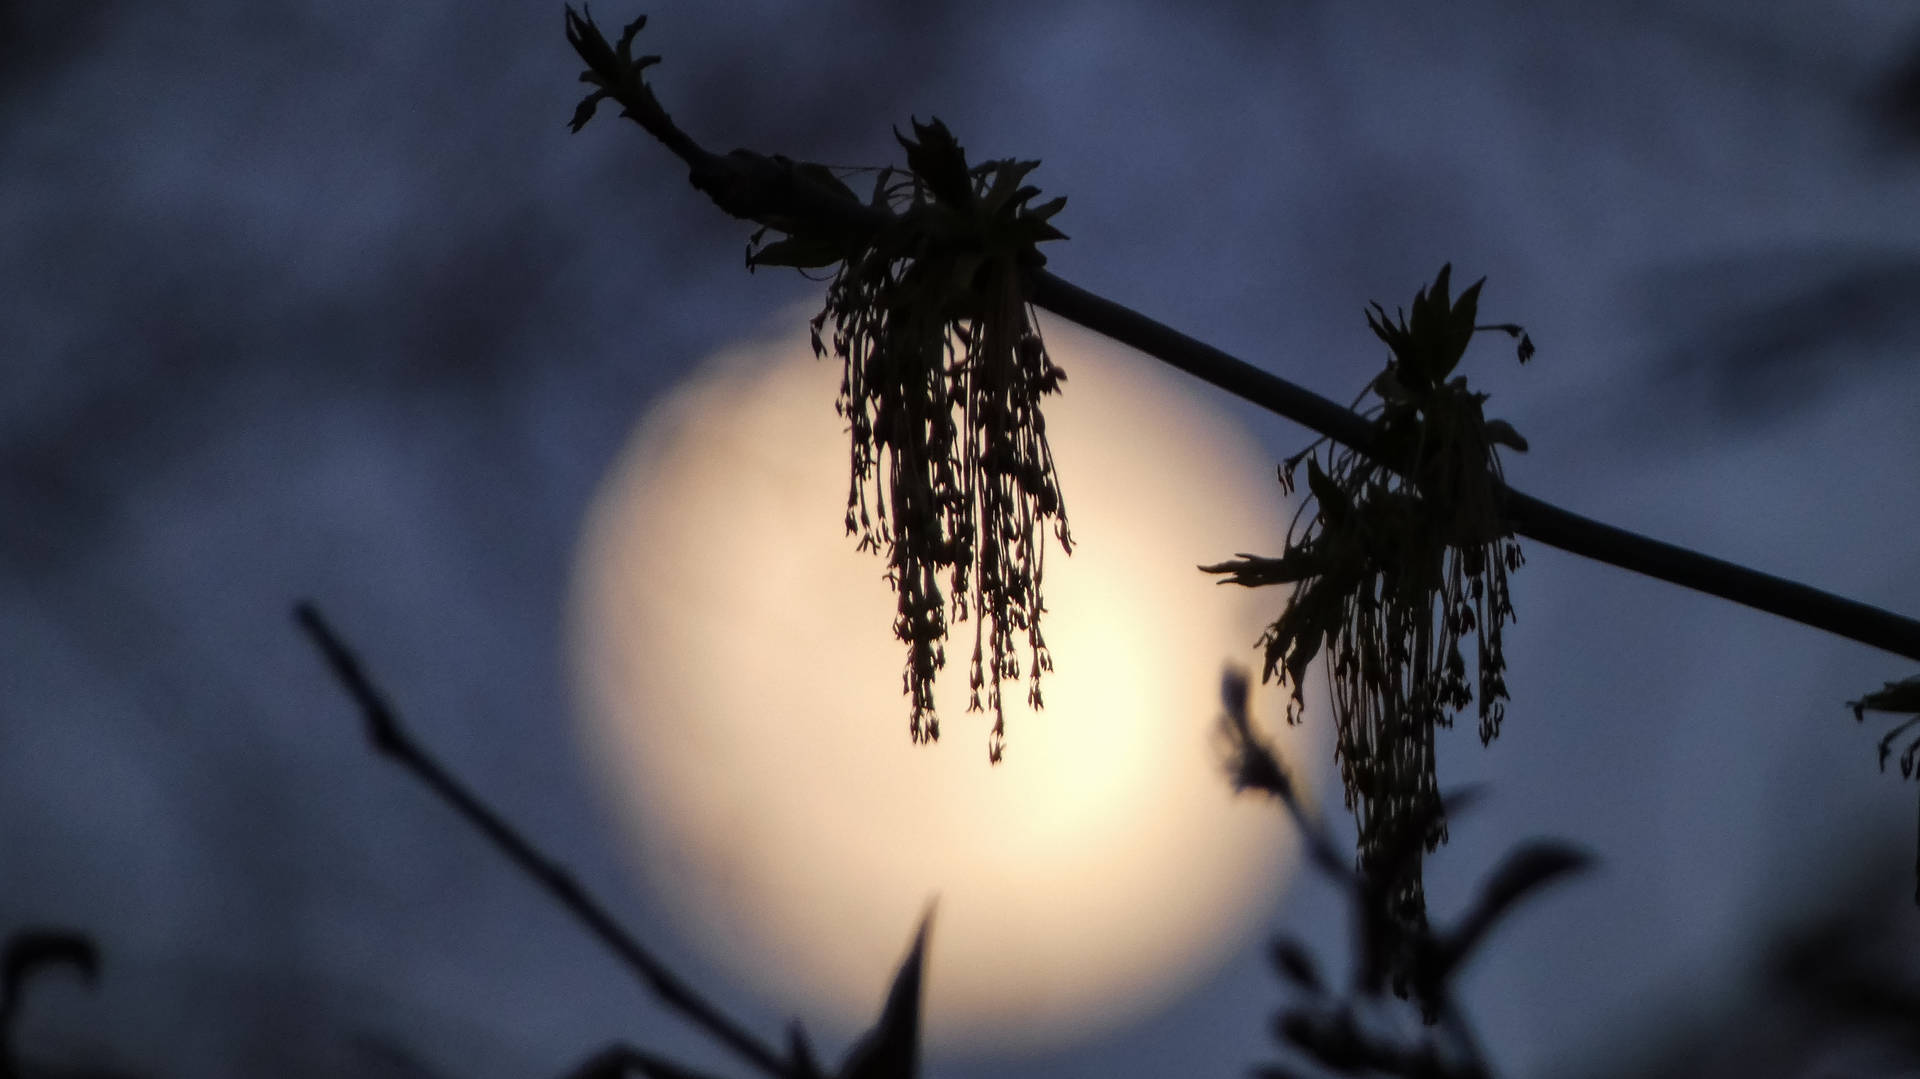 Hd Moon Behind Plant Silhouettes Wallpaper